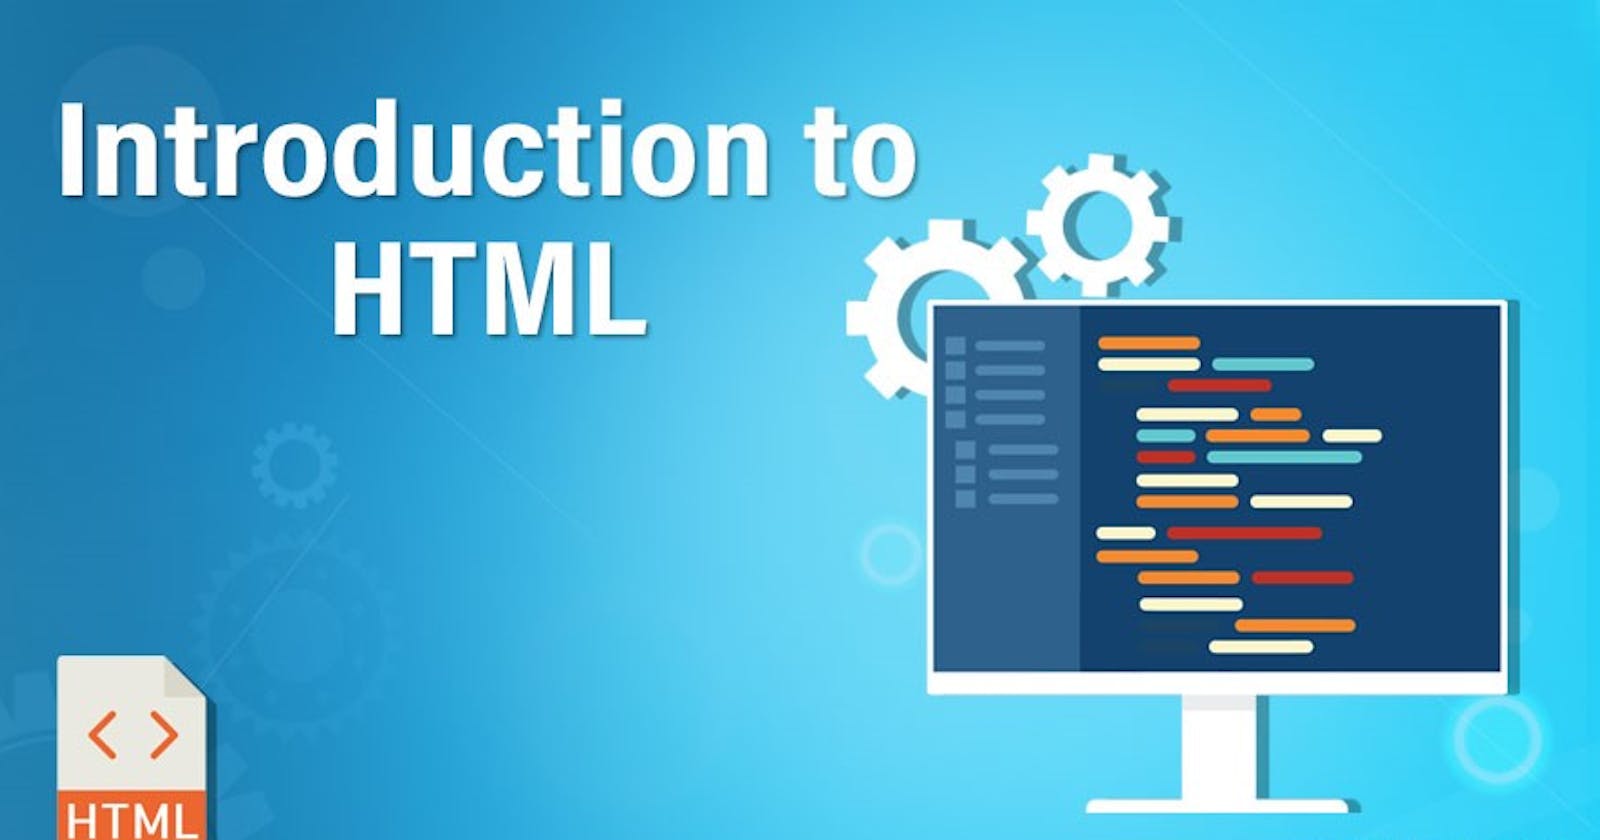 What is the HyperText Markup Language (HTML) ?